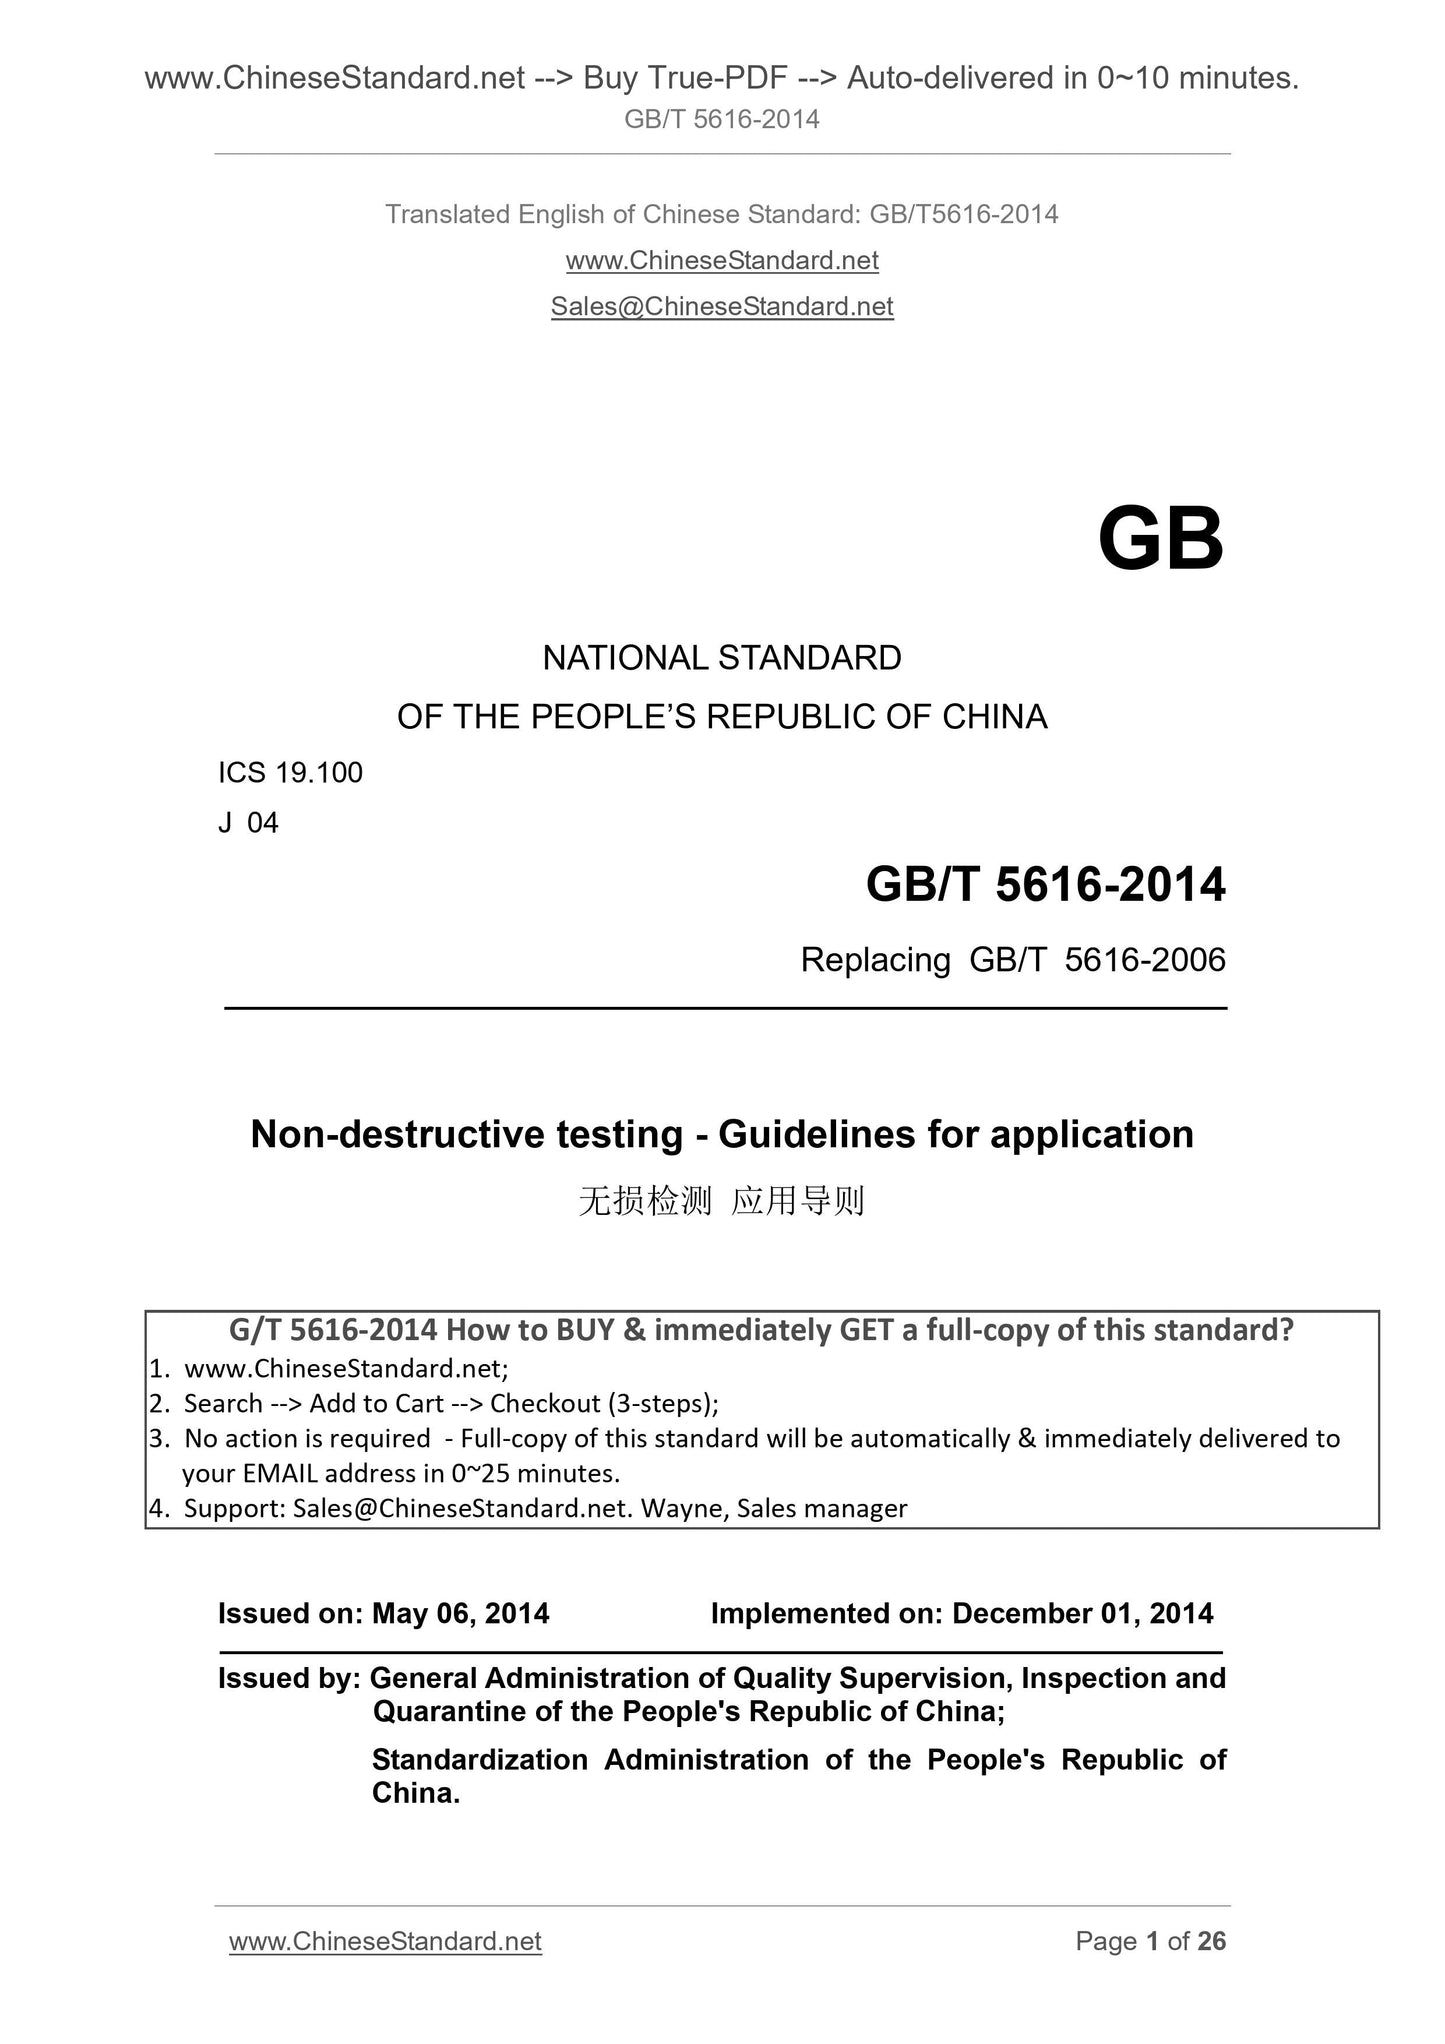 GB/T 5616-2014 Page 1